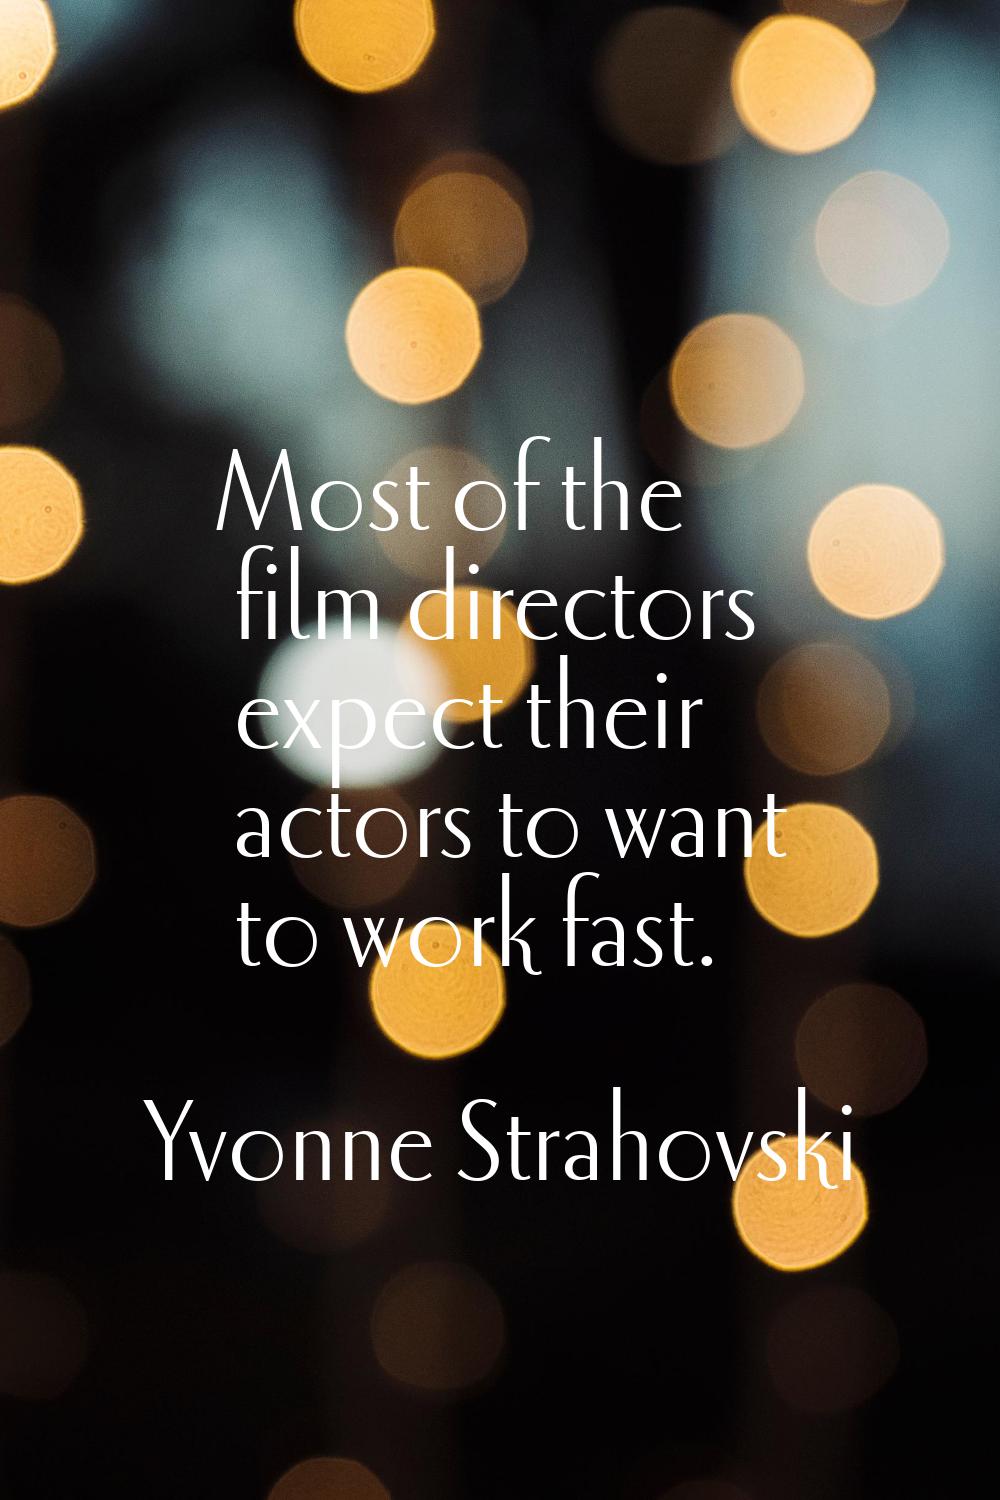 Most of the film directors expect their actors to want to work fast.